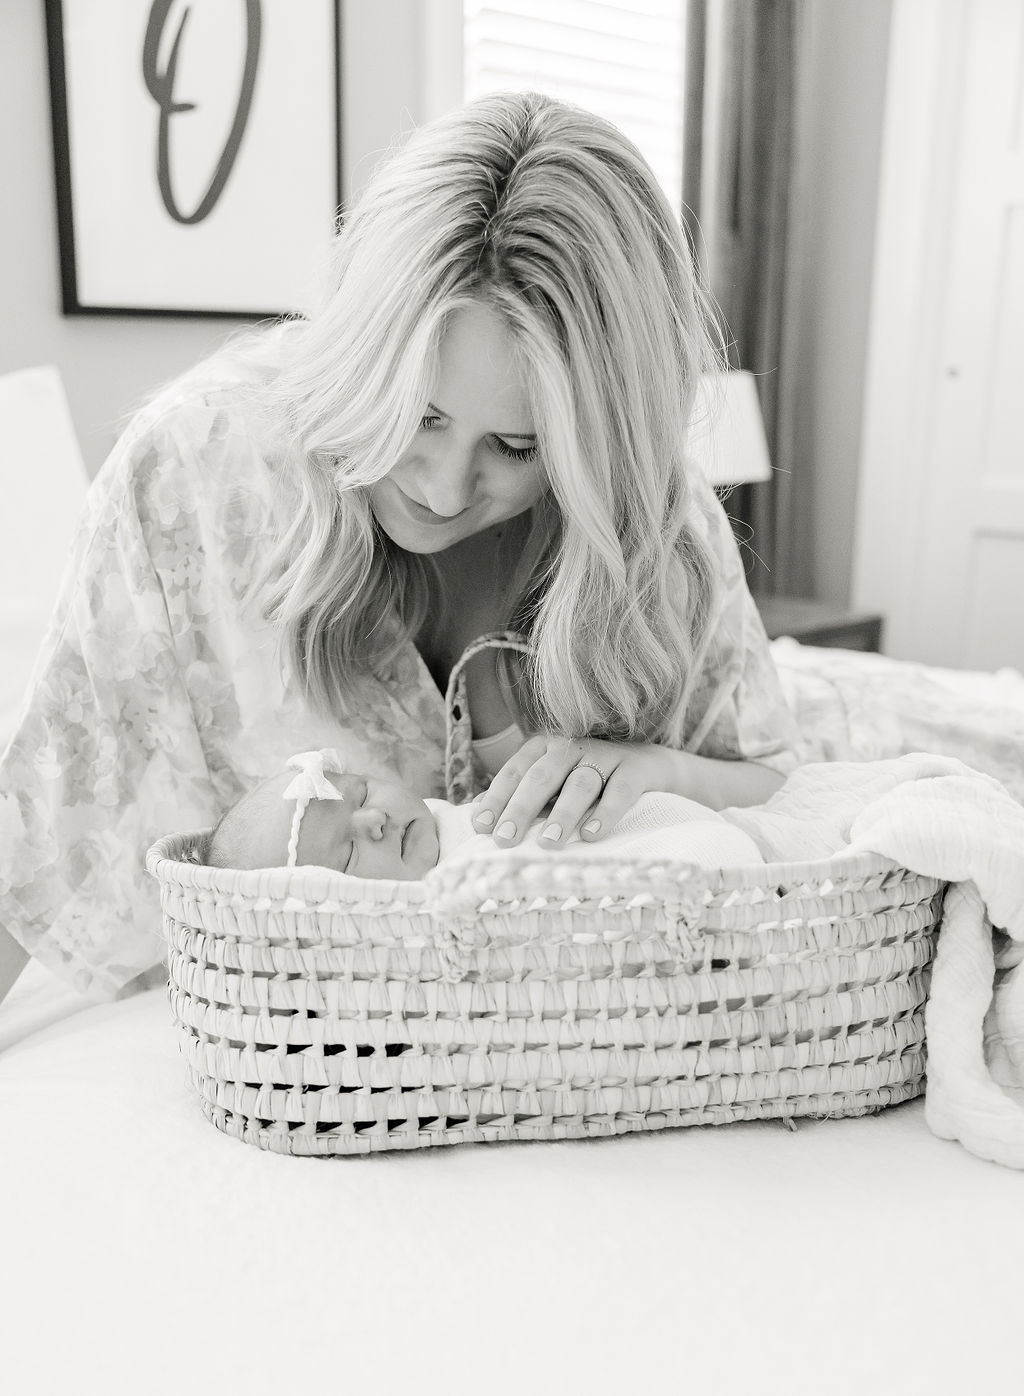 A new mother leans over and places her hand on her sleeping newborn baby in a woven basket nannies indianapolis